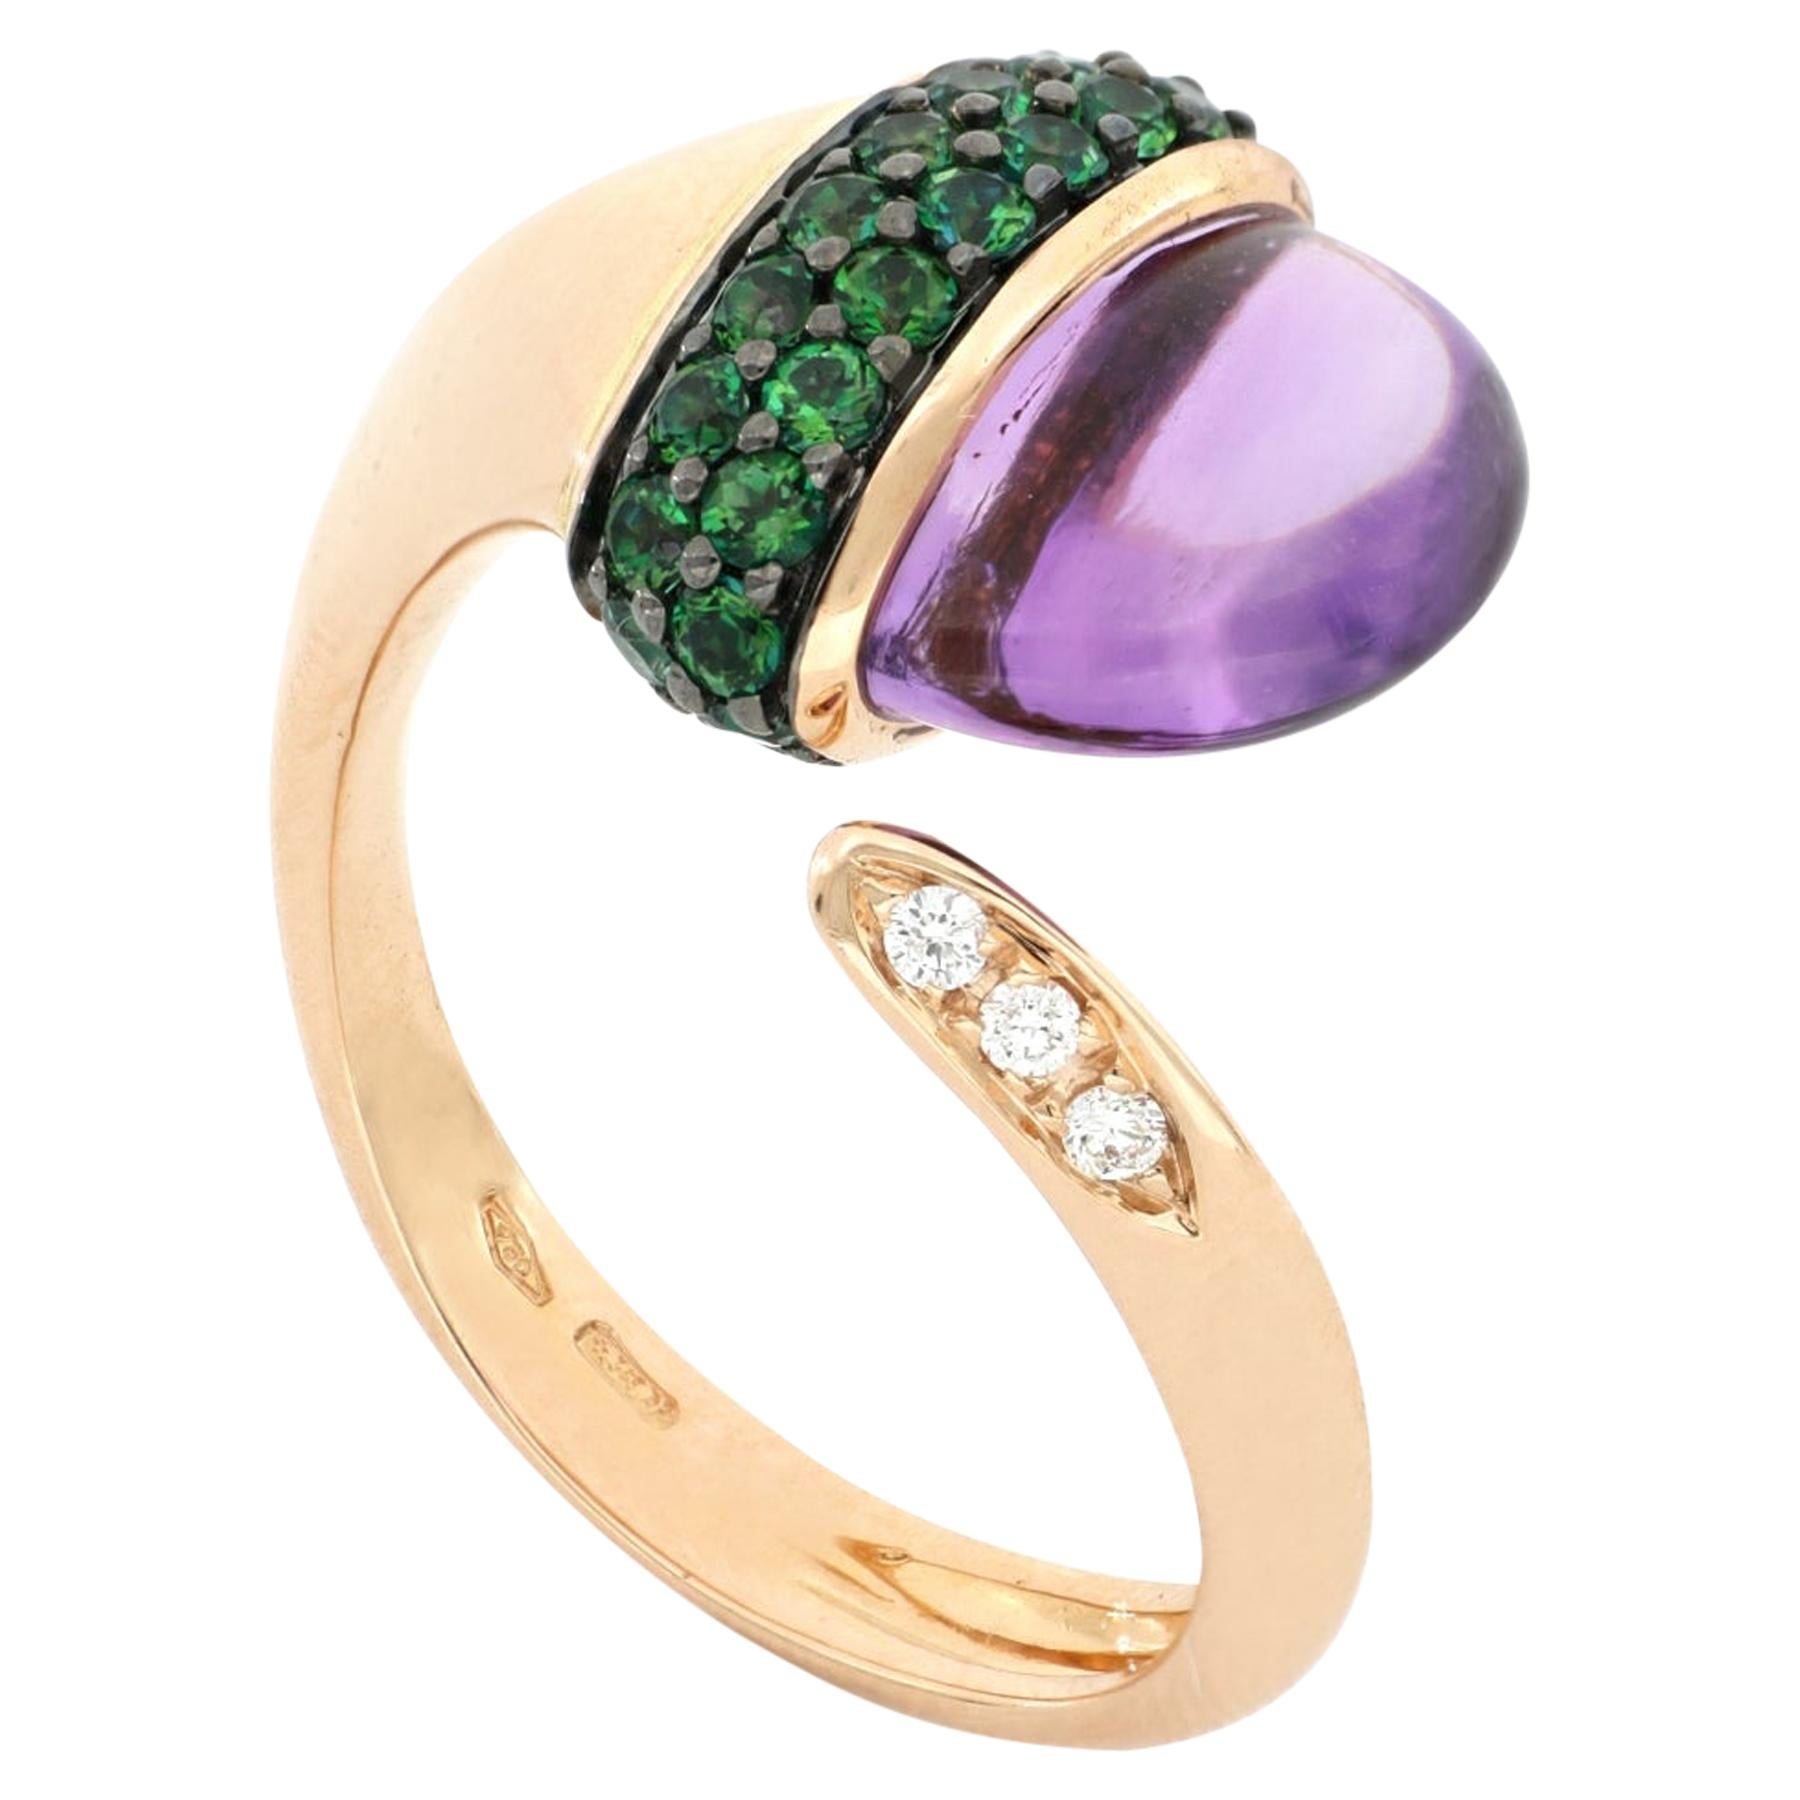 For Sale:  18kt Rose Gold Les Bois Open Ring with Purple Amethyts and Green Topaz